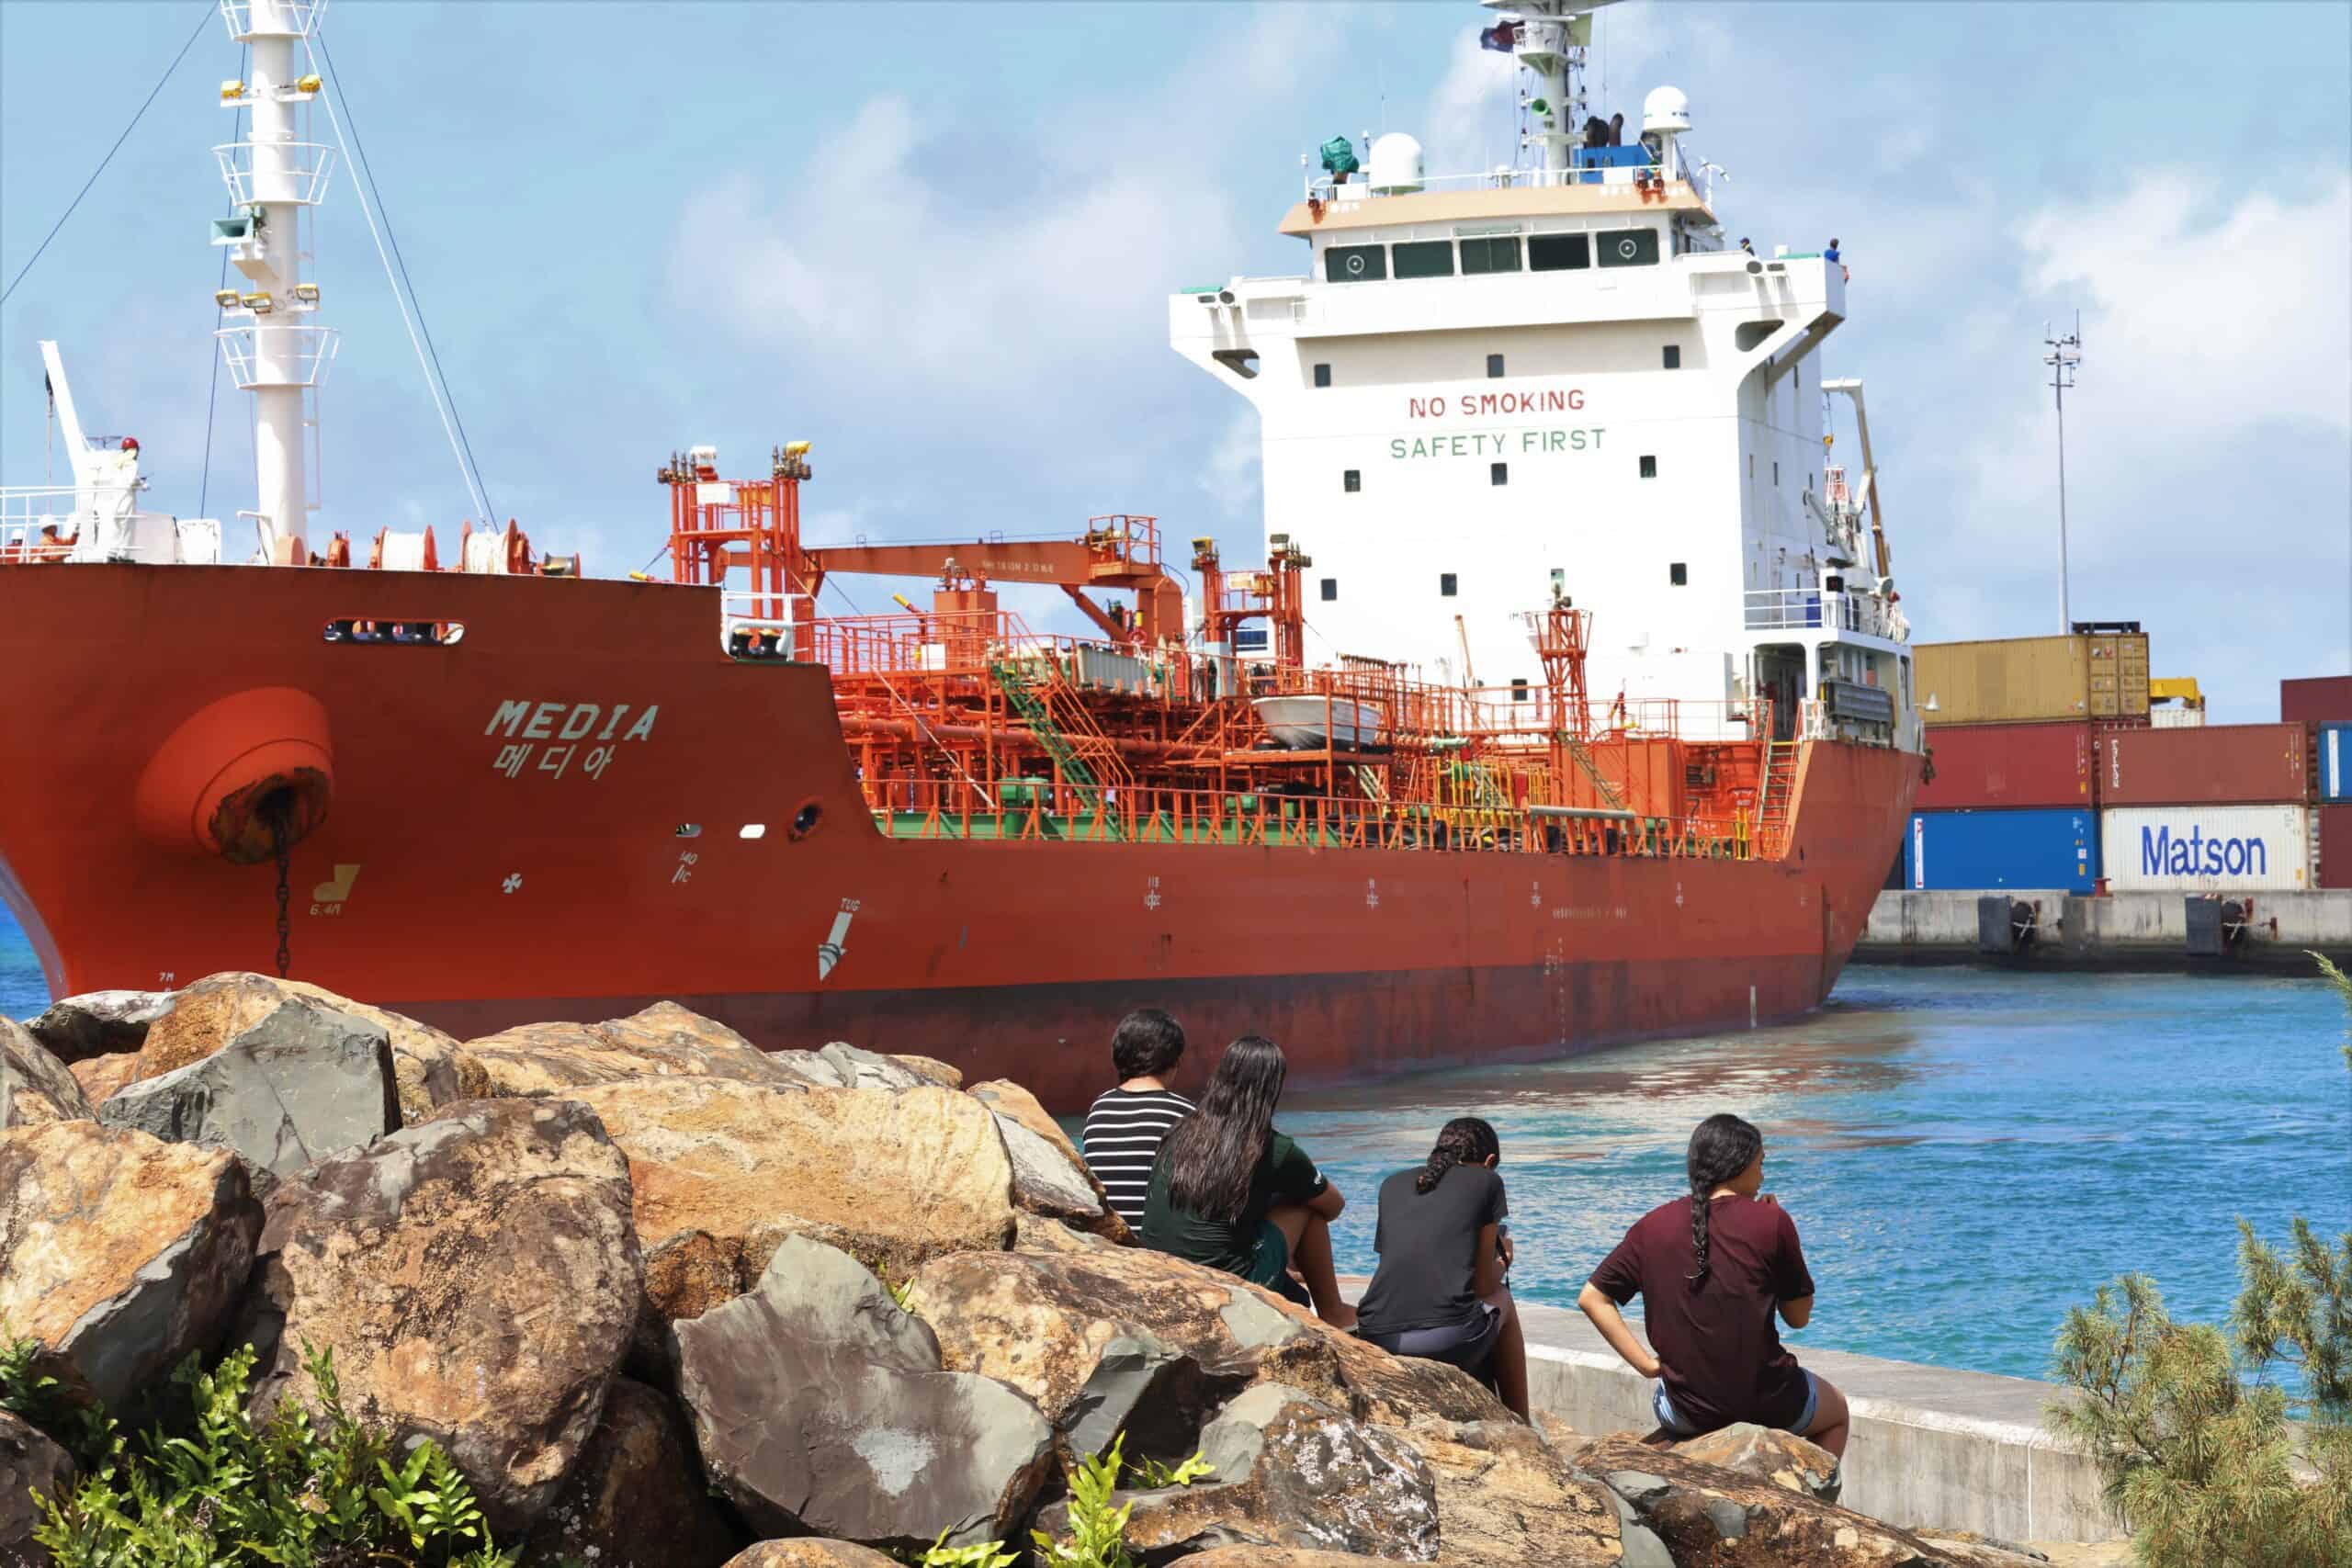 Fuel Ship ‘Media’ arrives, and  it’s good news for petrol supplies